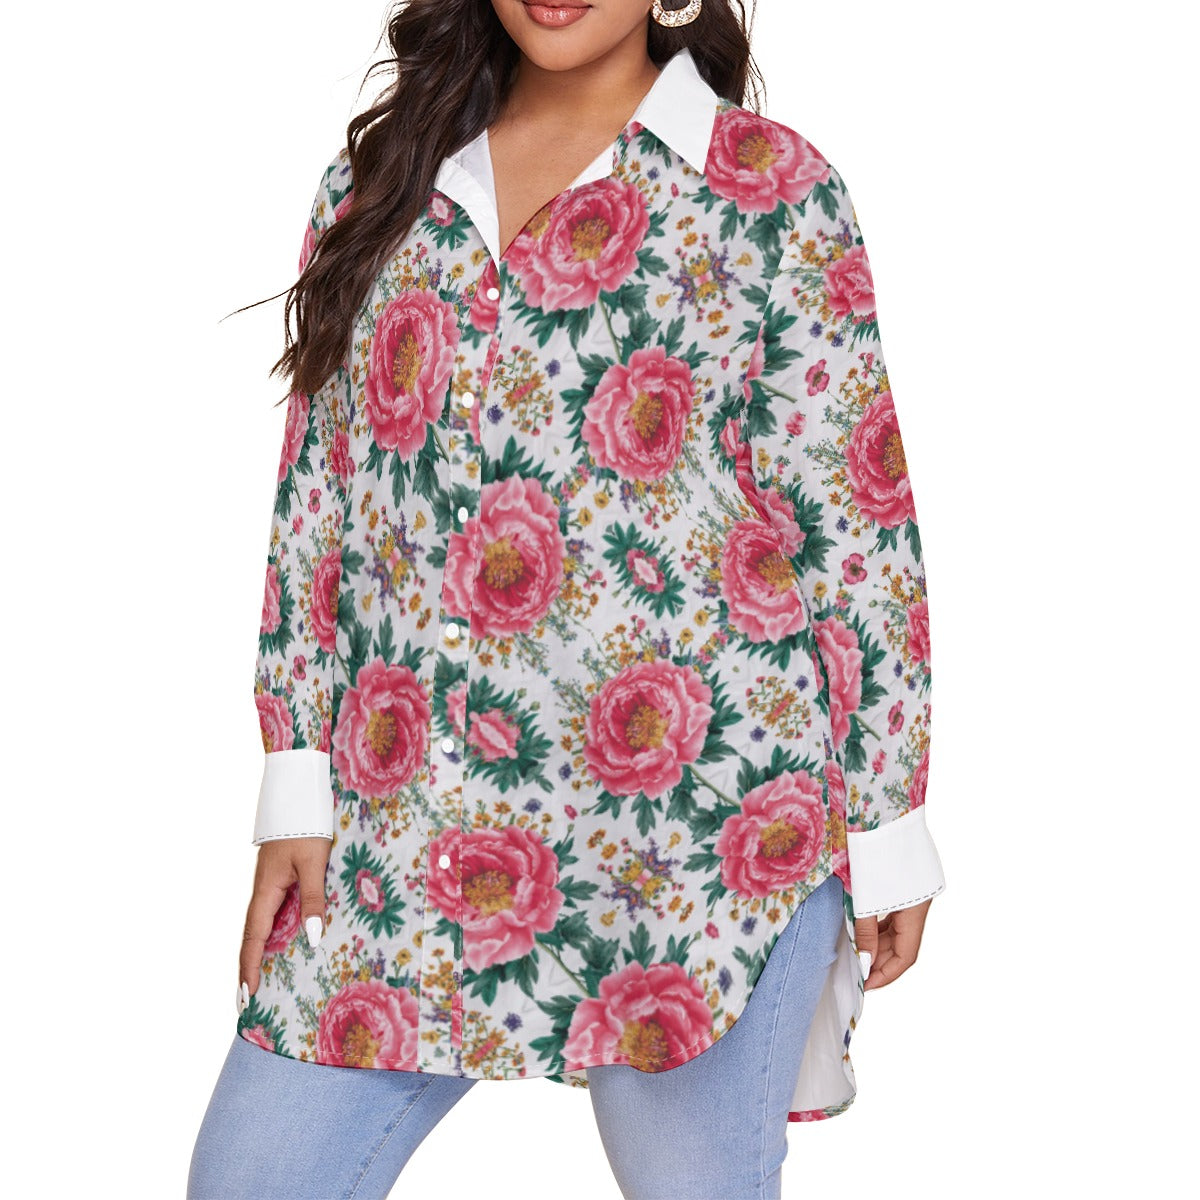 Hot Pink Peony on Bias - Women's Shirt With Long Sleeve(Plus Size)